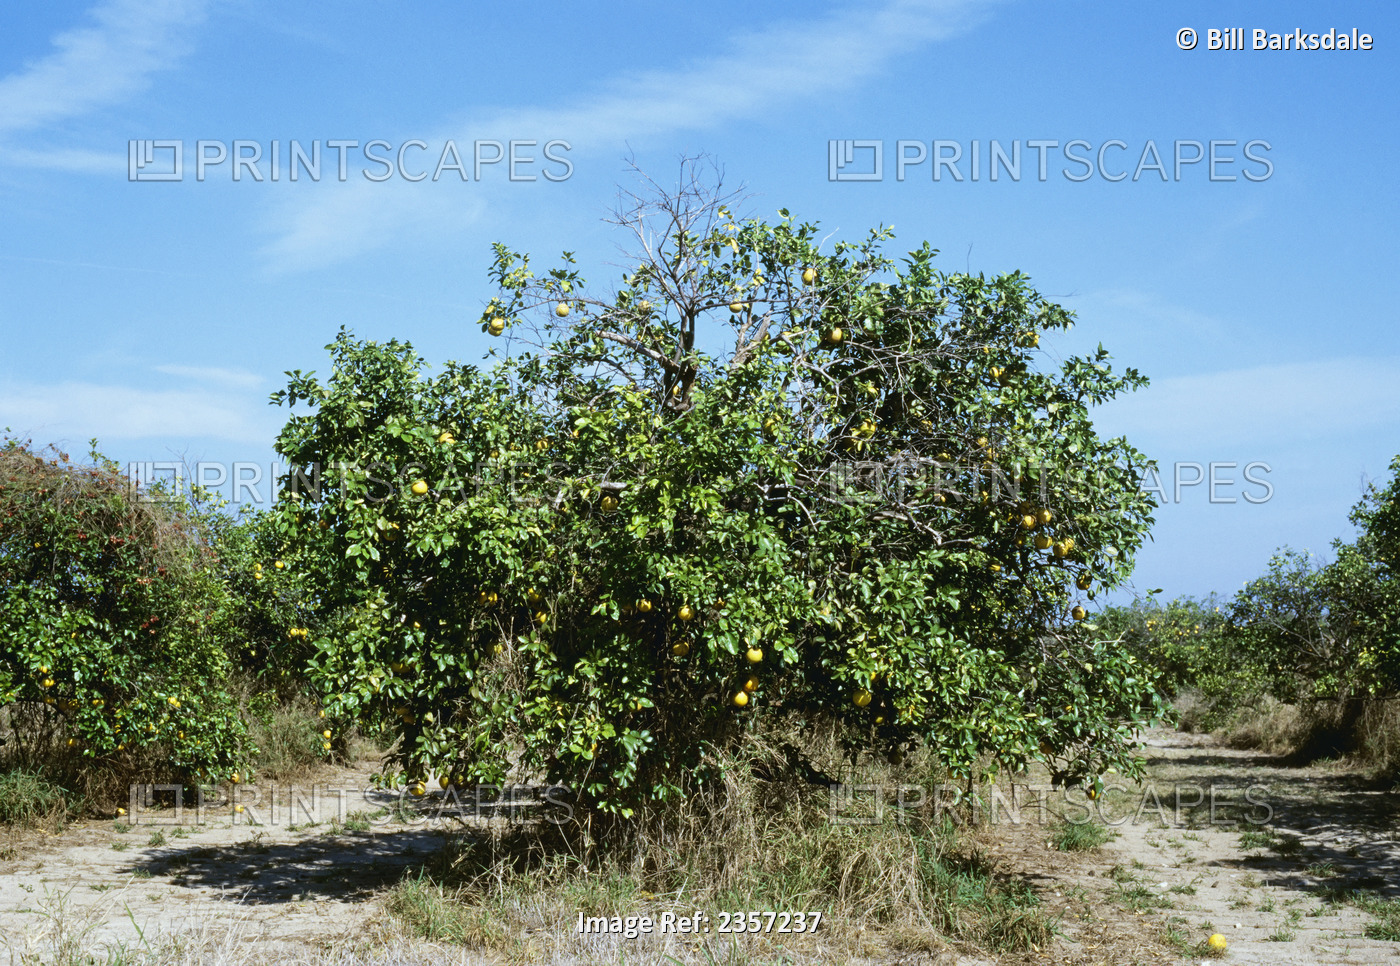 Agriculture - A grapefruit tree dying from burrowing nematode injury / Florida, ...